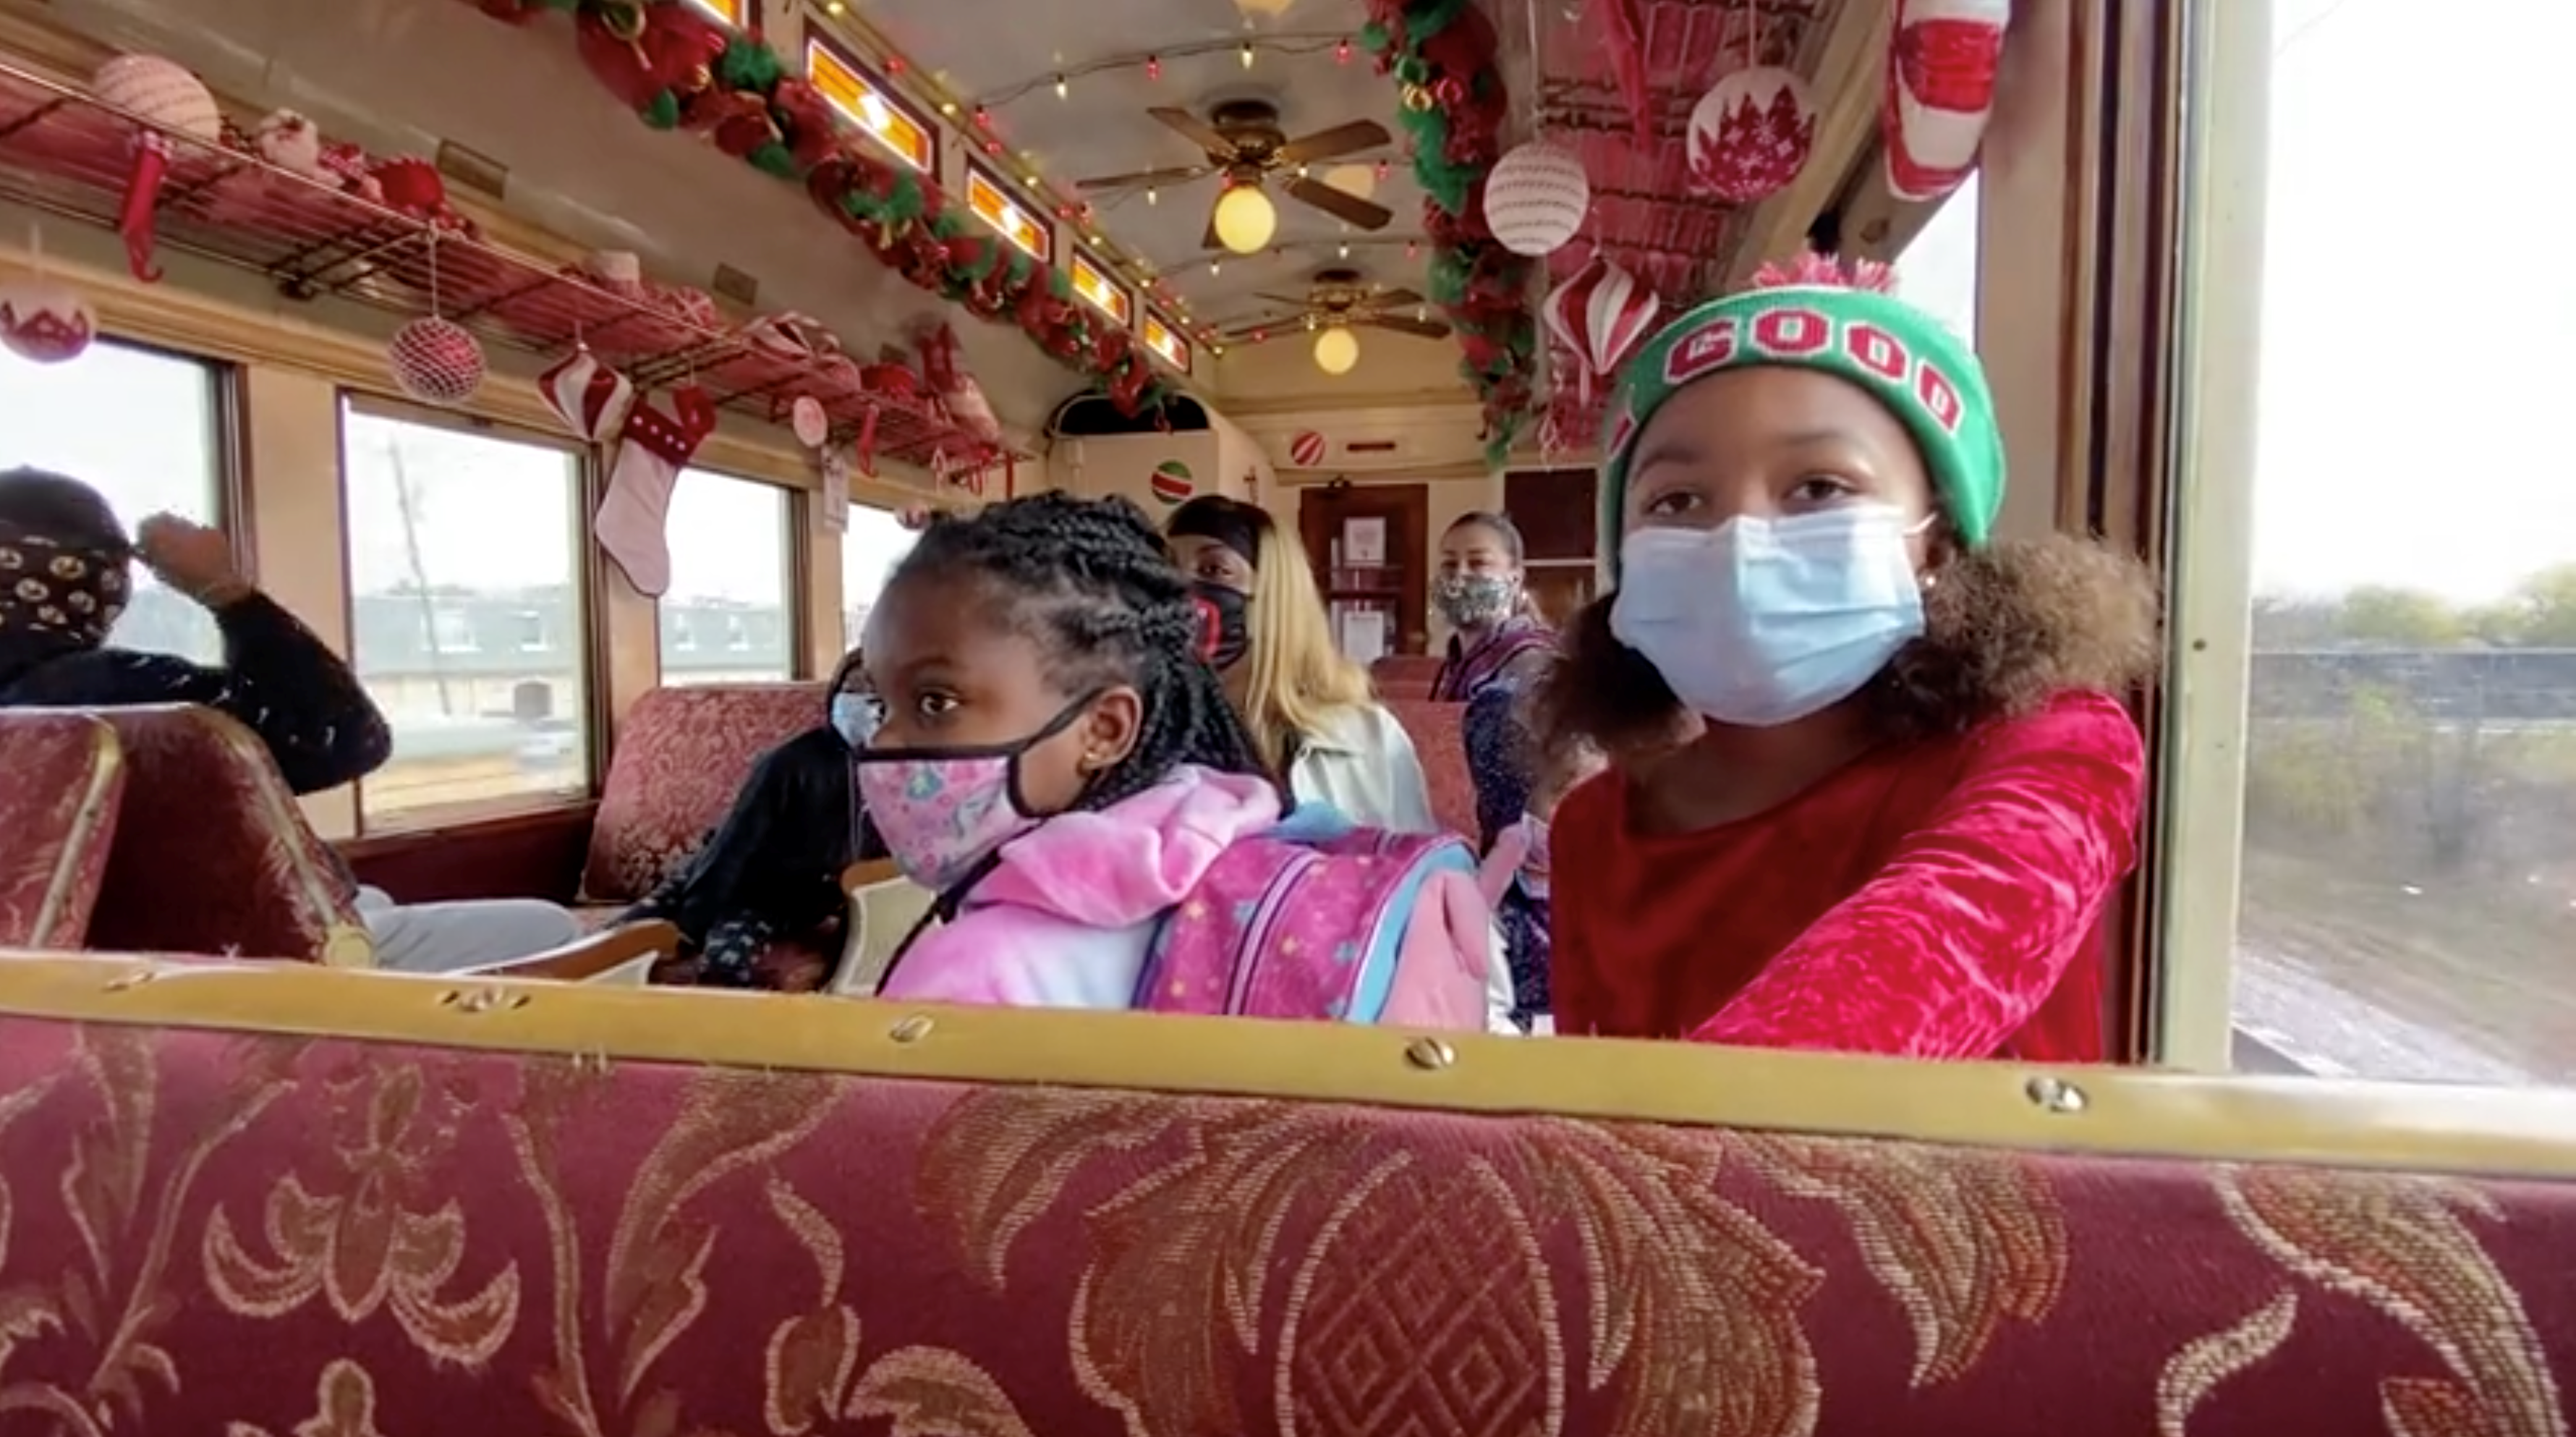 Children aboard the North Pole Express created on the Grapevine Vintage Railroad. (Spectrum News 1)